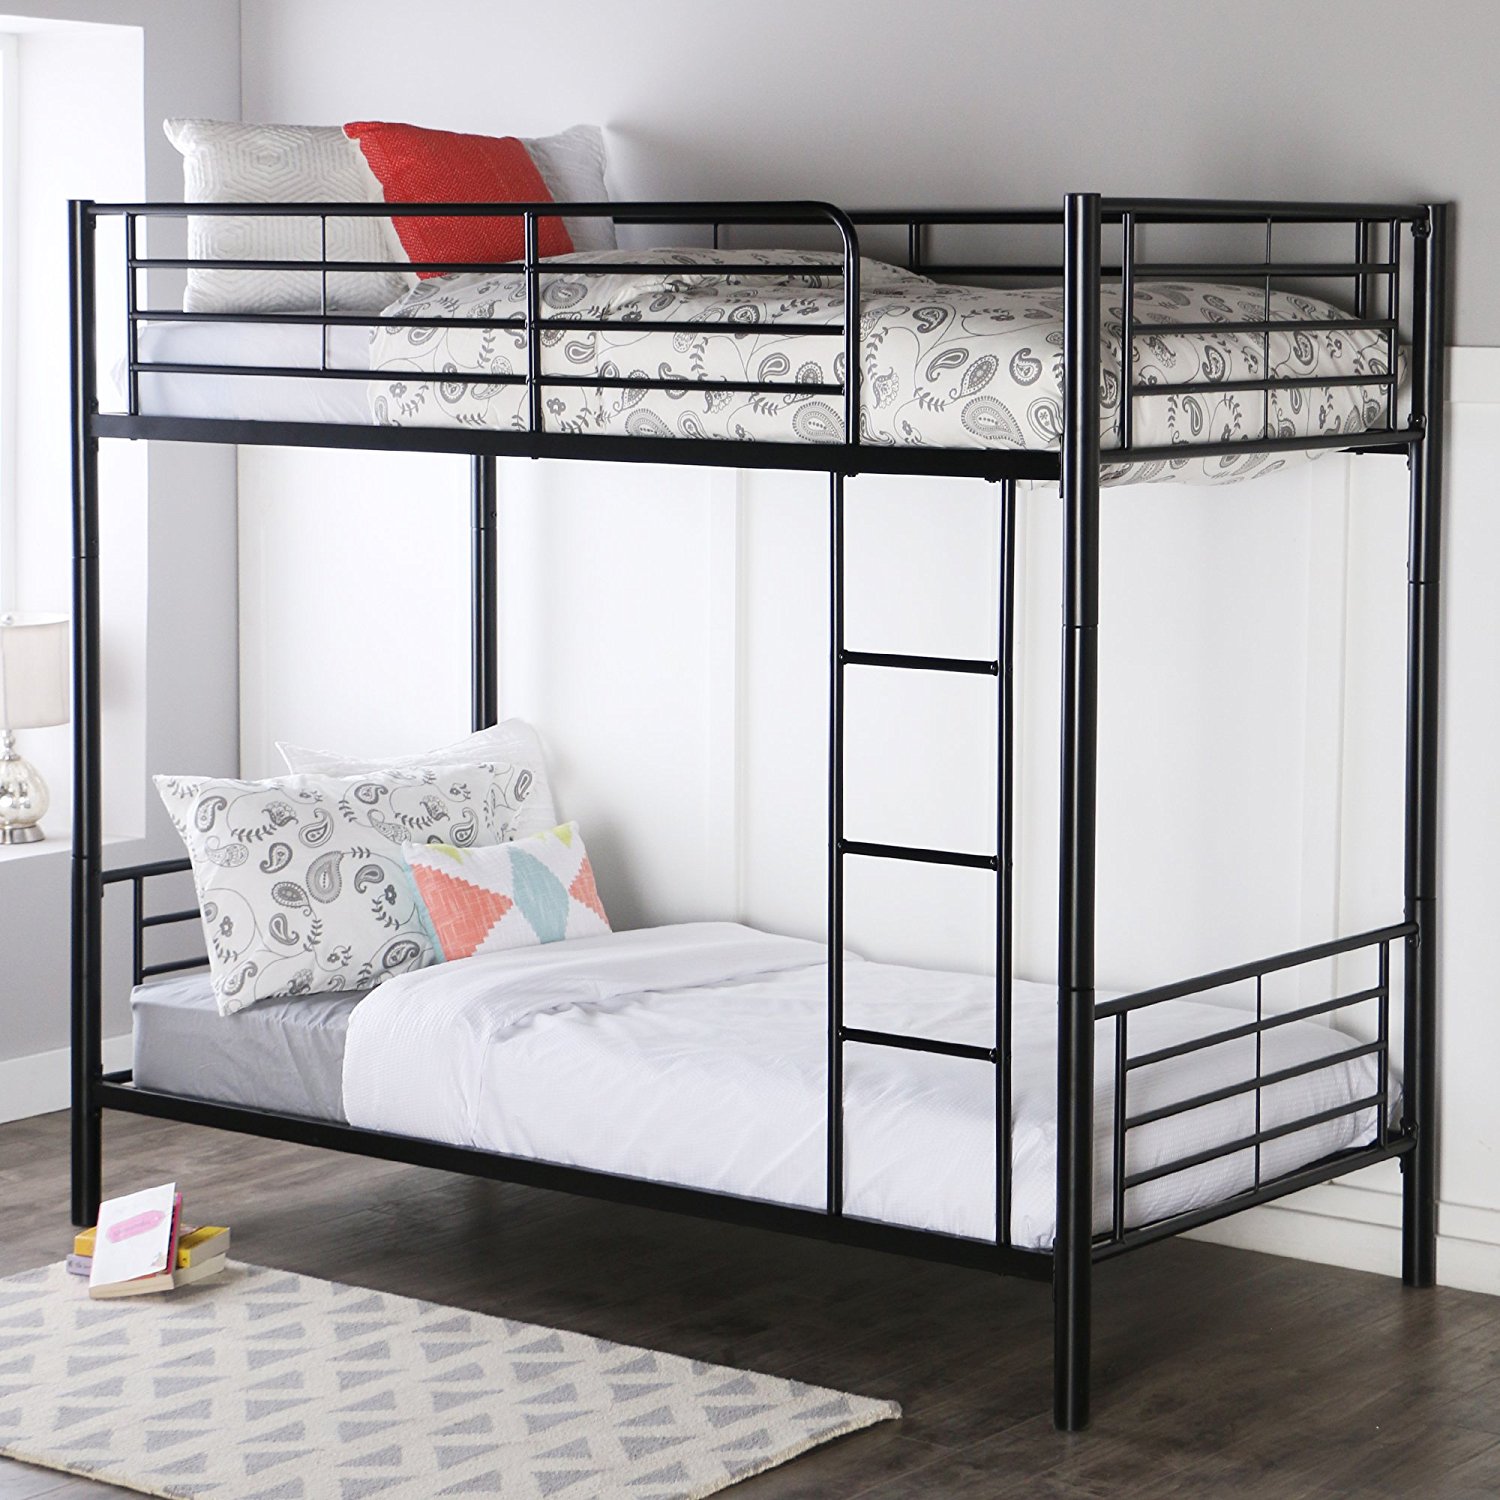 Chic and Cheap Bunk Beds under $200